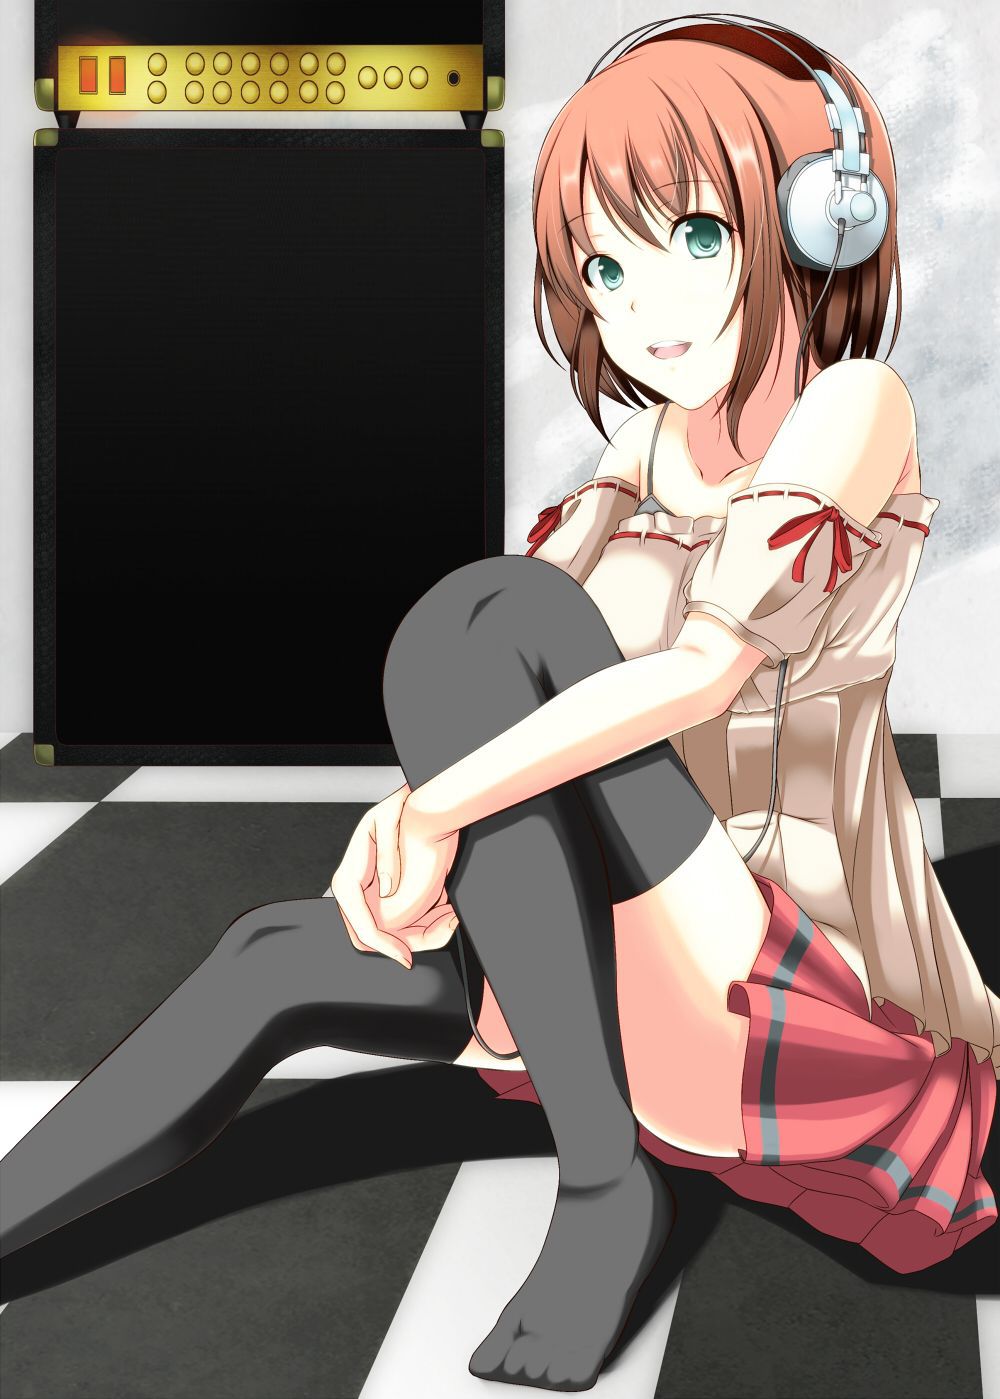 [Secondary] MoE's headphone girl cute picture 30